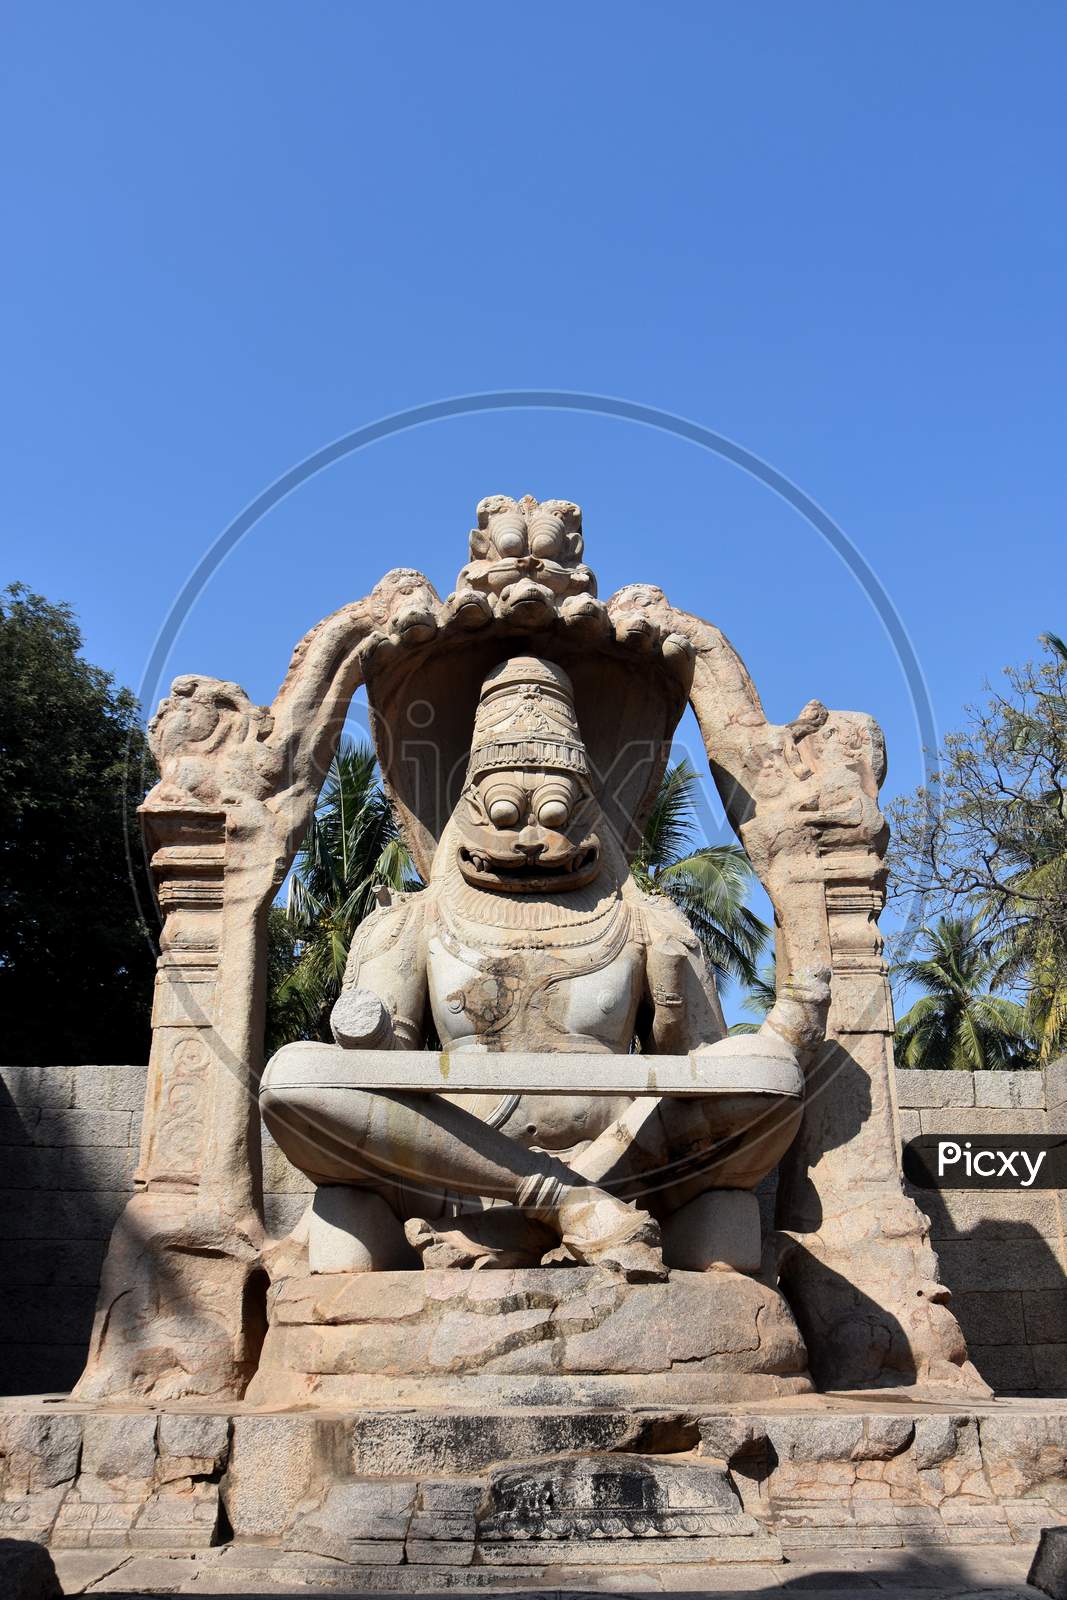 Lakshmi Narasimha Temple Or Statue Of Ugra Narasimha, Hampi. The Speciality Of The Sculpture Is That It Is The Largest Monolith Statue In Hampi.